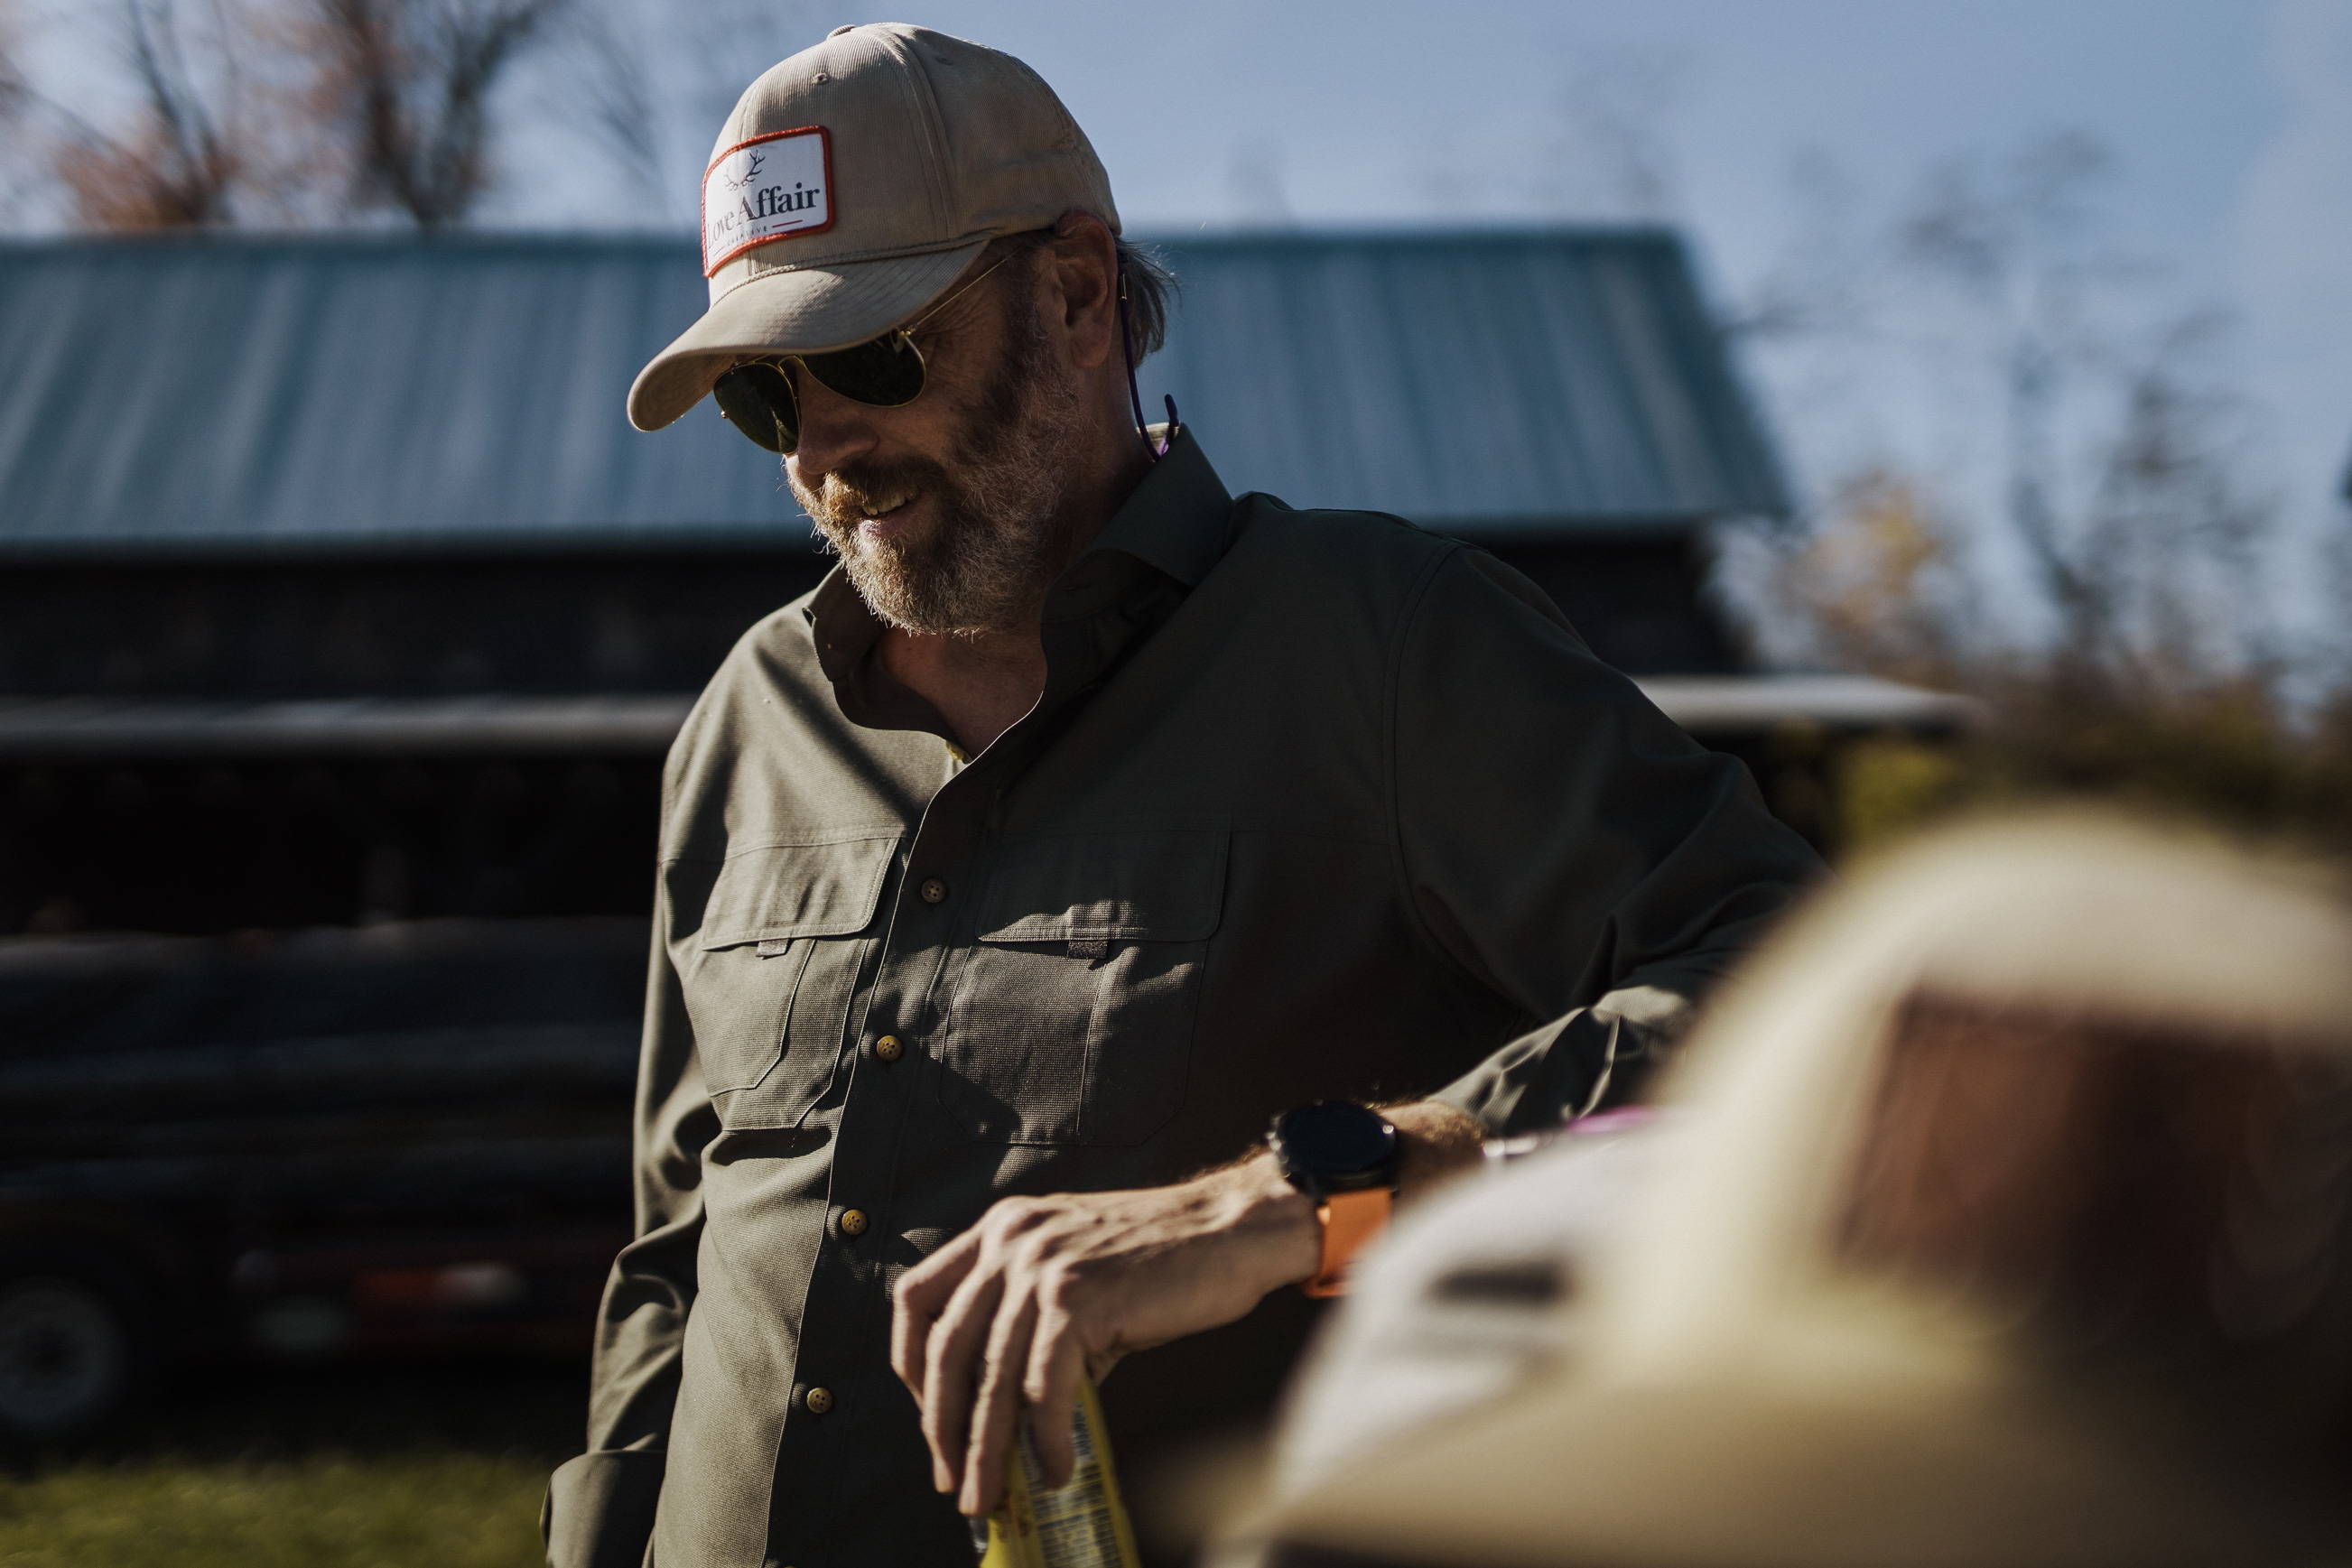 A man with a beard wearing the olive tulu custom fishing shirt, and hat, and sunglasses.